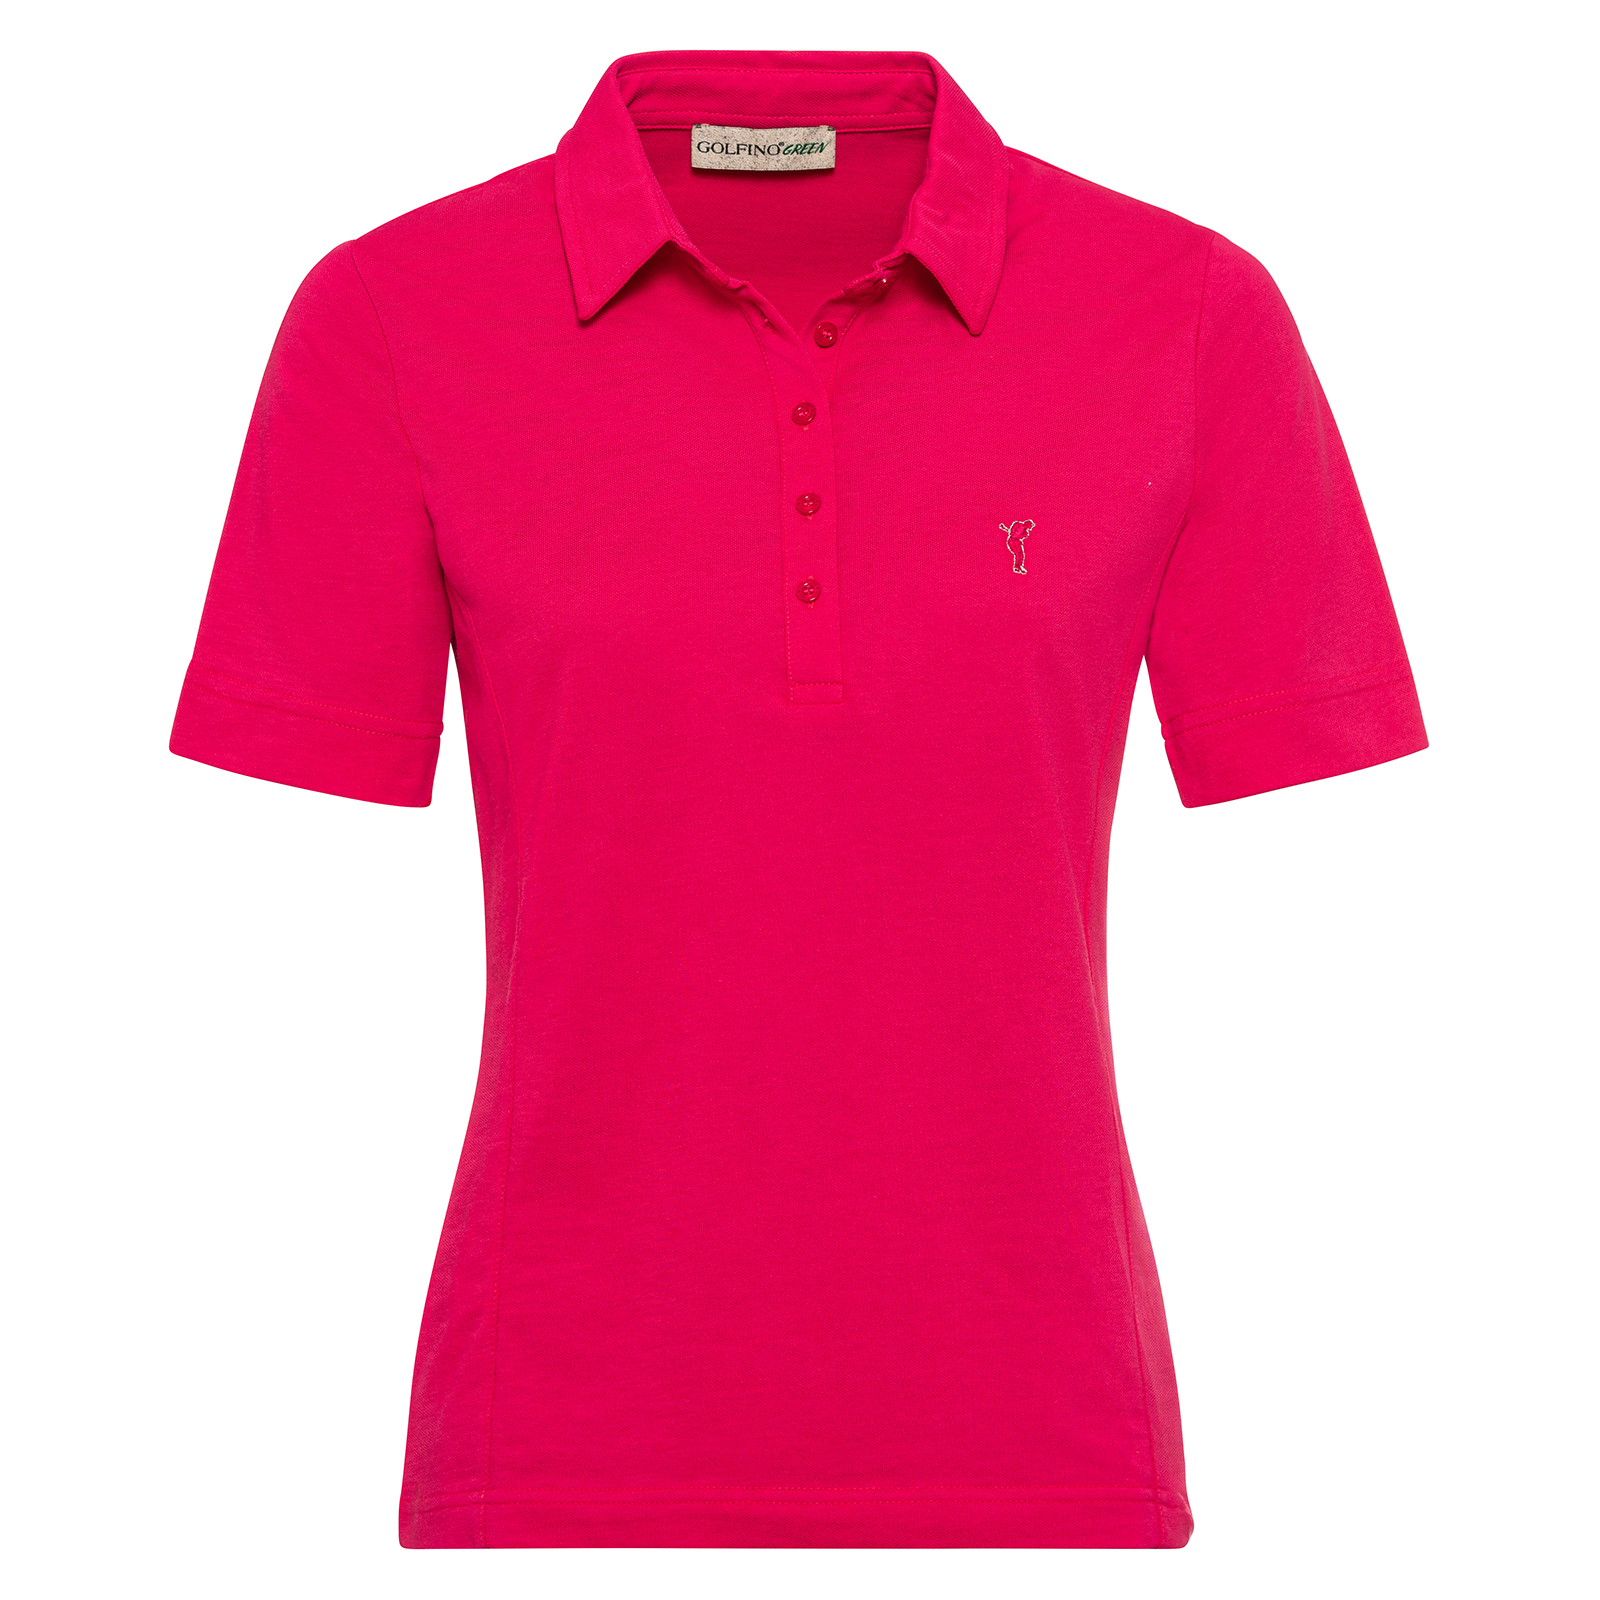 Sustainably produced ladies' golf top 